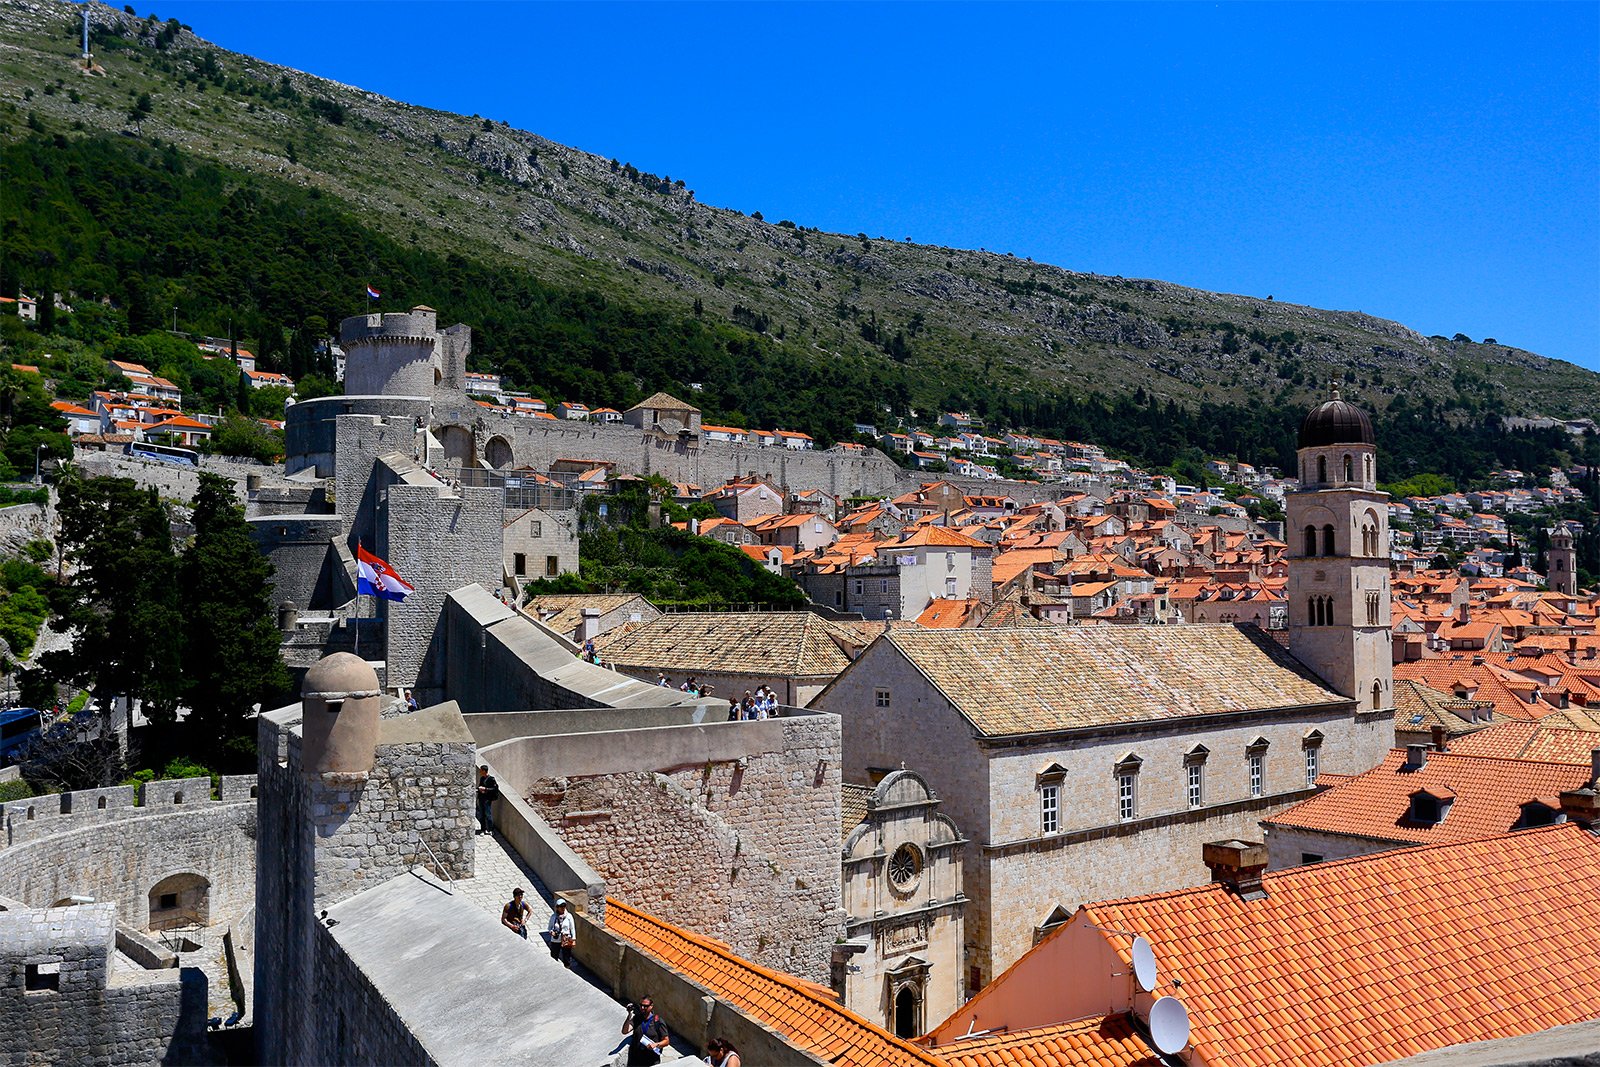 How to walk atop the City Walls of Dubrovnik in Dubrovnik